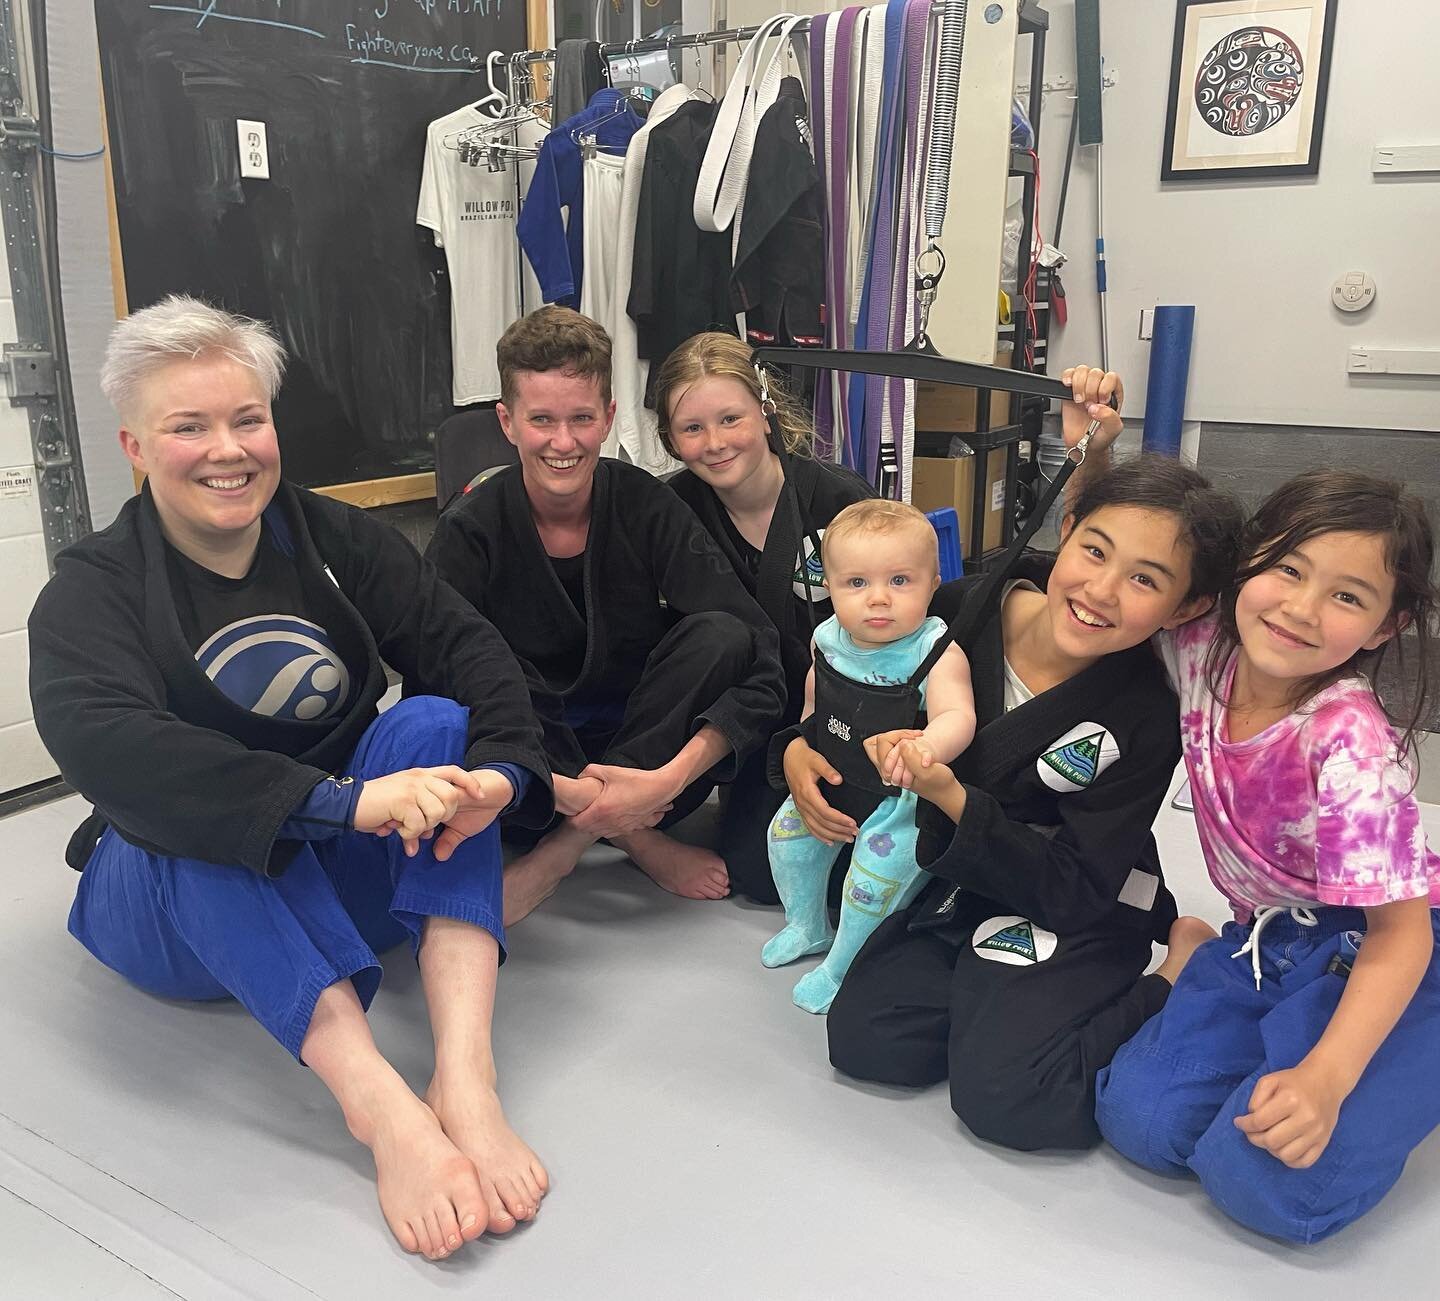 Coach @sarezack will be running a women&rsquo;s only class starting this Thursday, August 18th at 5pm! We&rsquo;re so excited for coach Sarah to share her near 10 years of BJJ experience with the next generation of BJJ women!👏🏼
.
Thursdays at 6pm i